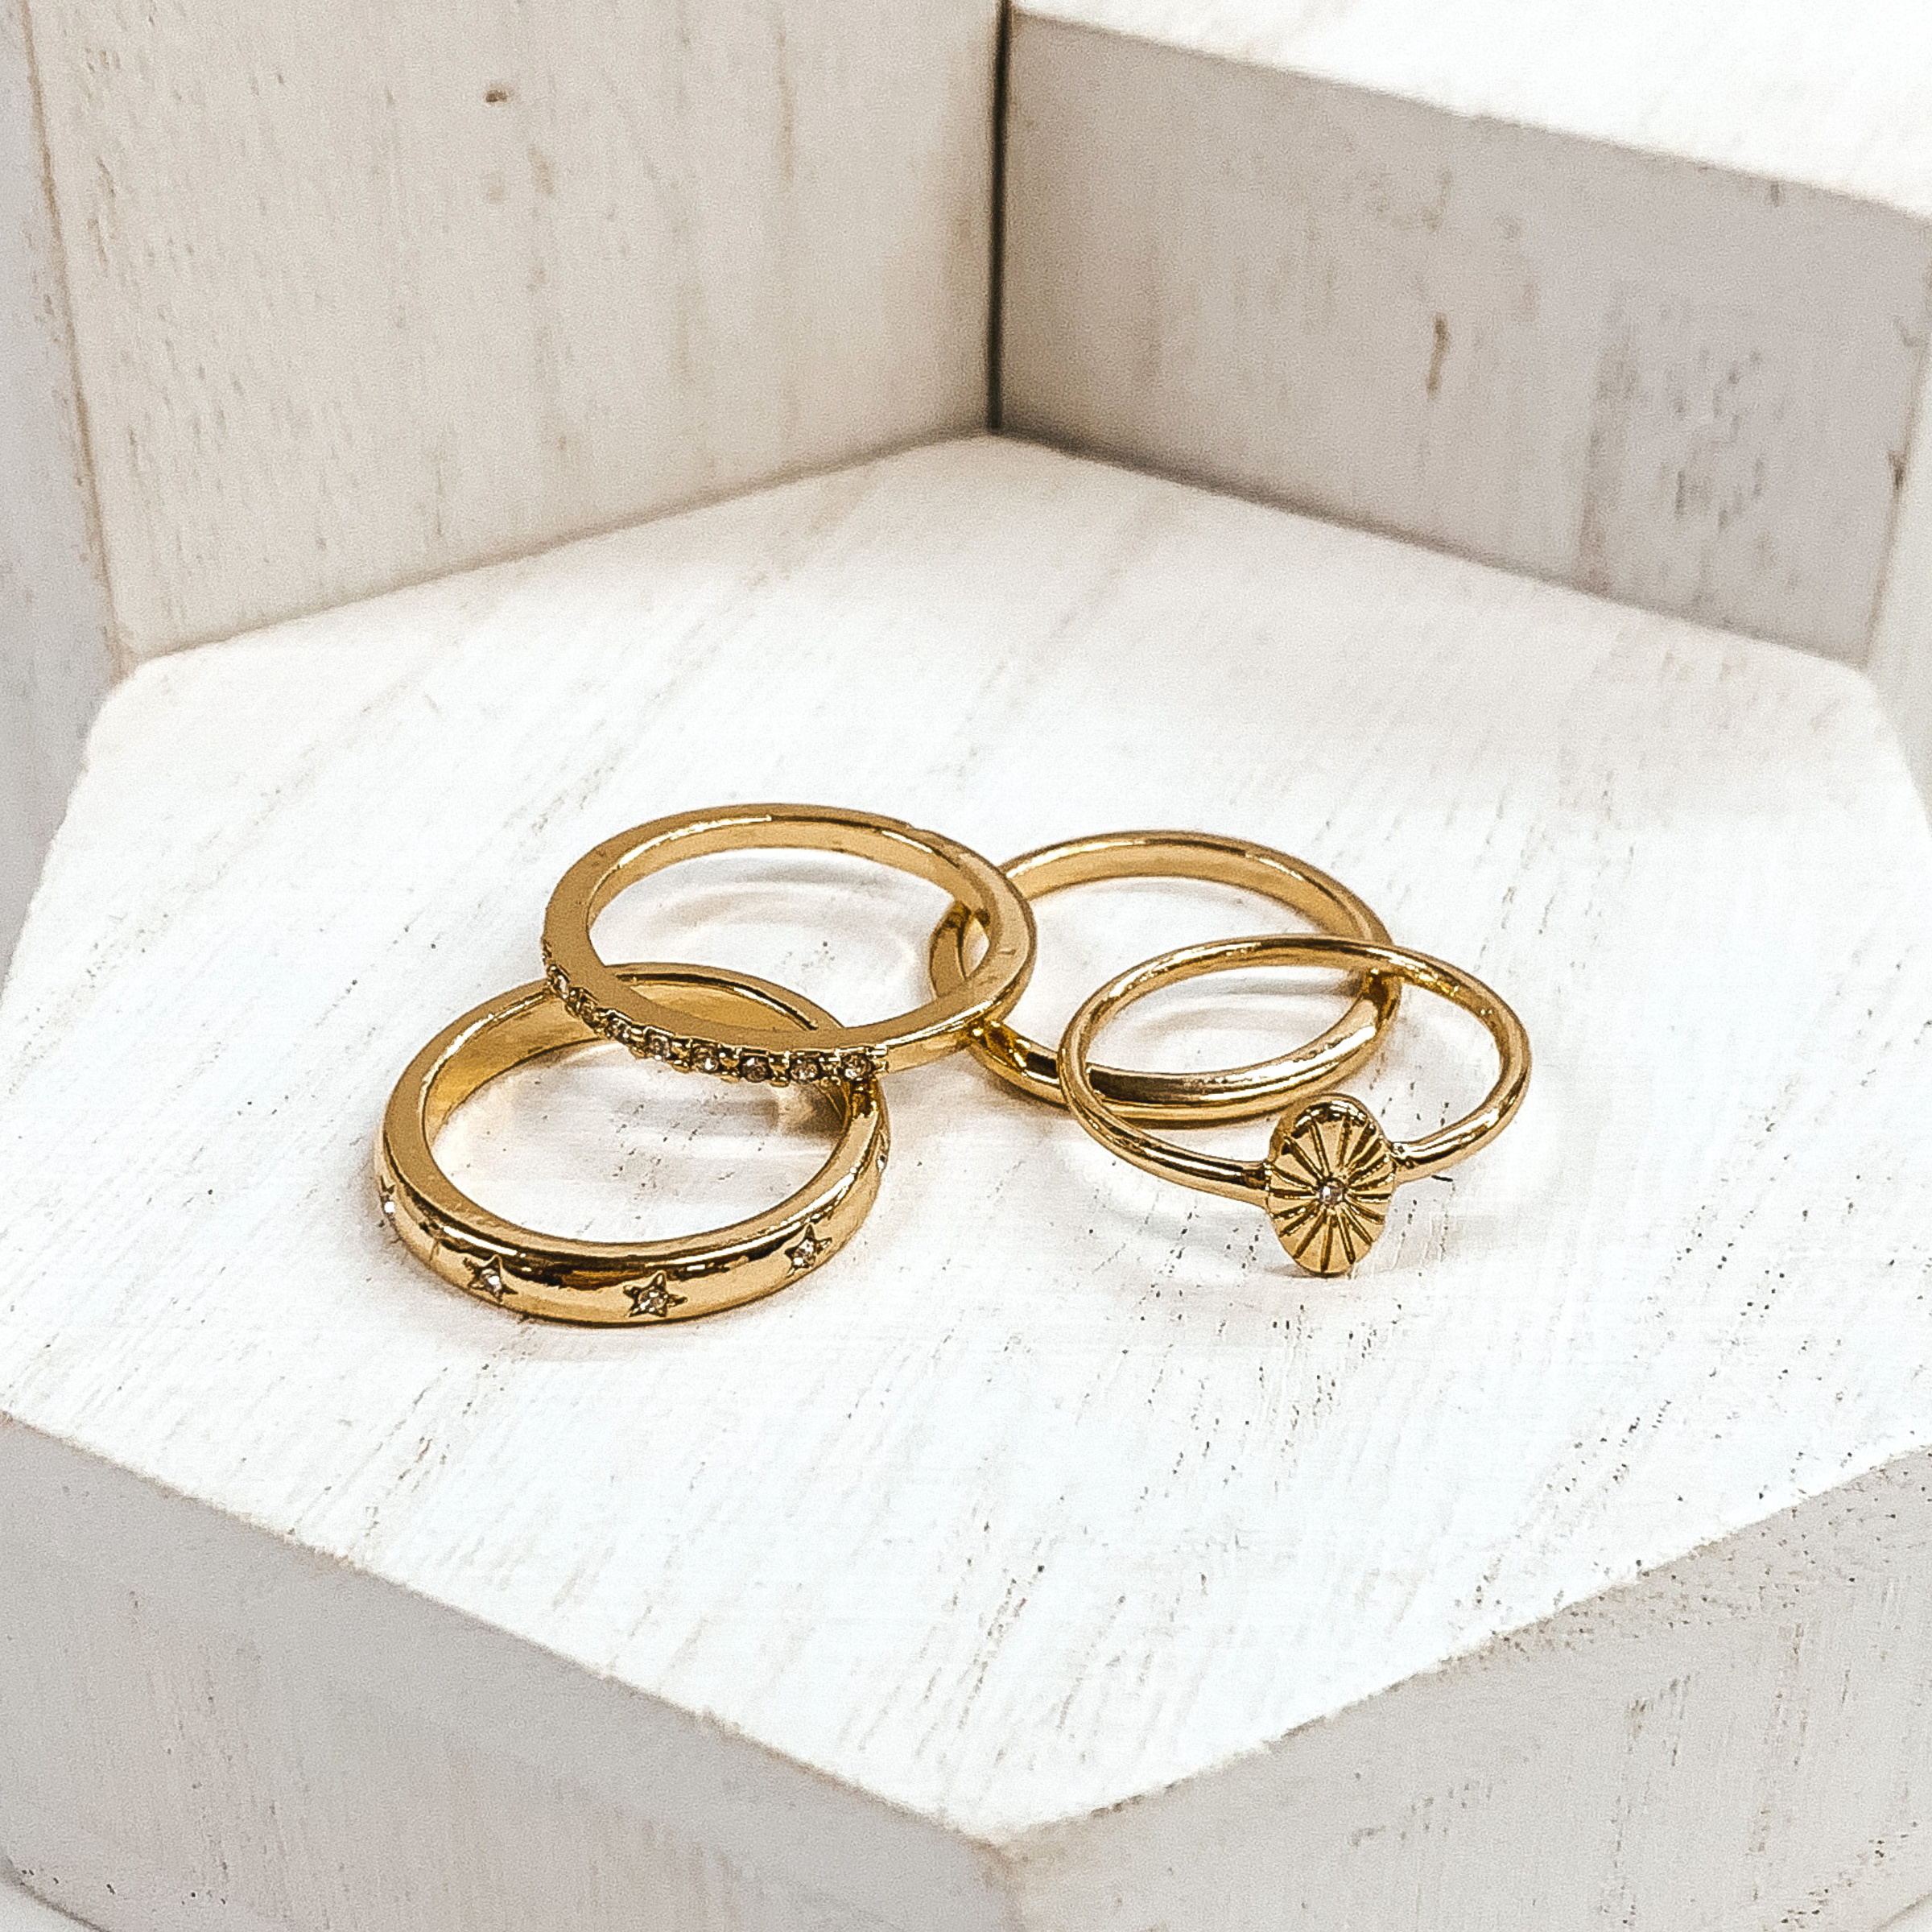 Set of gold rings pictured on white blocks. One ring has an oval pendant, one is a plain band, another ring has clear crystals, and the last ring has tiny engraved stars with tiny clear crystals.